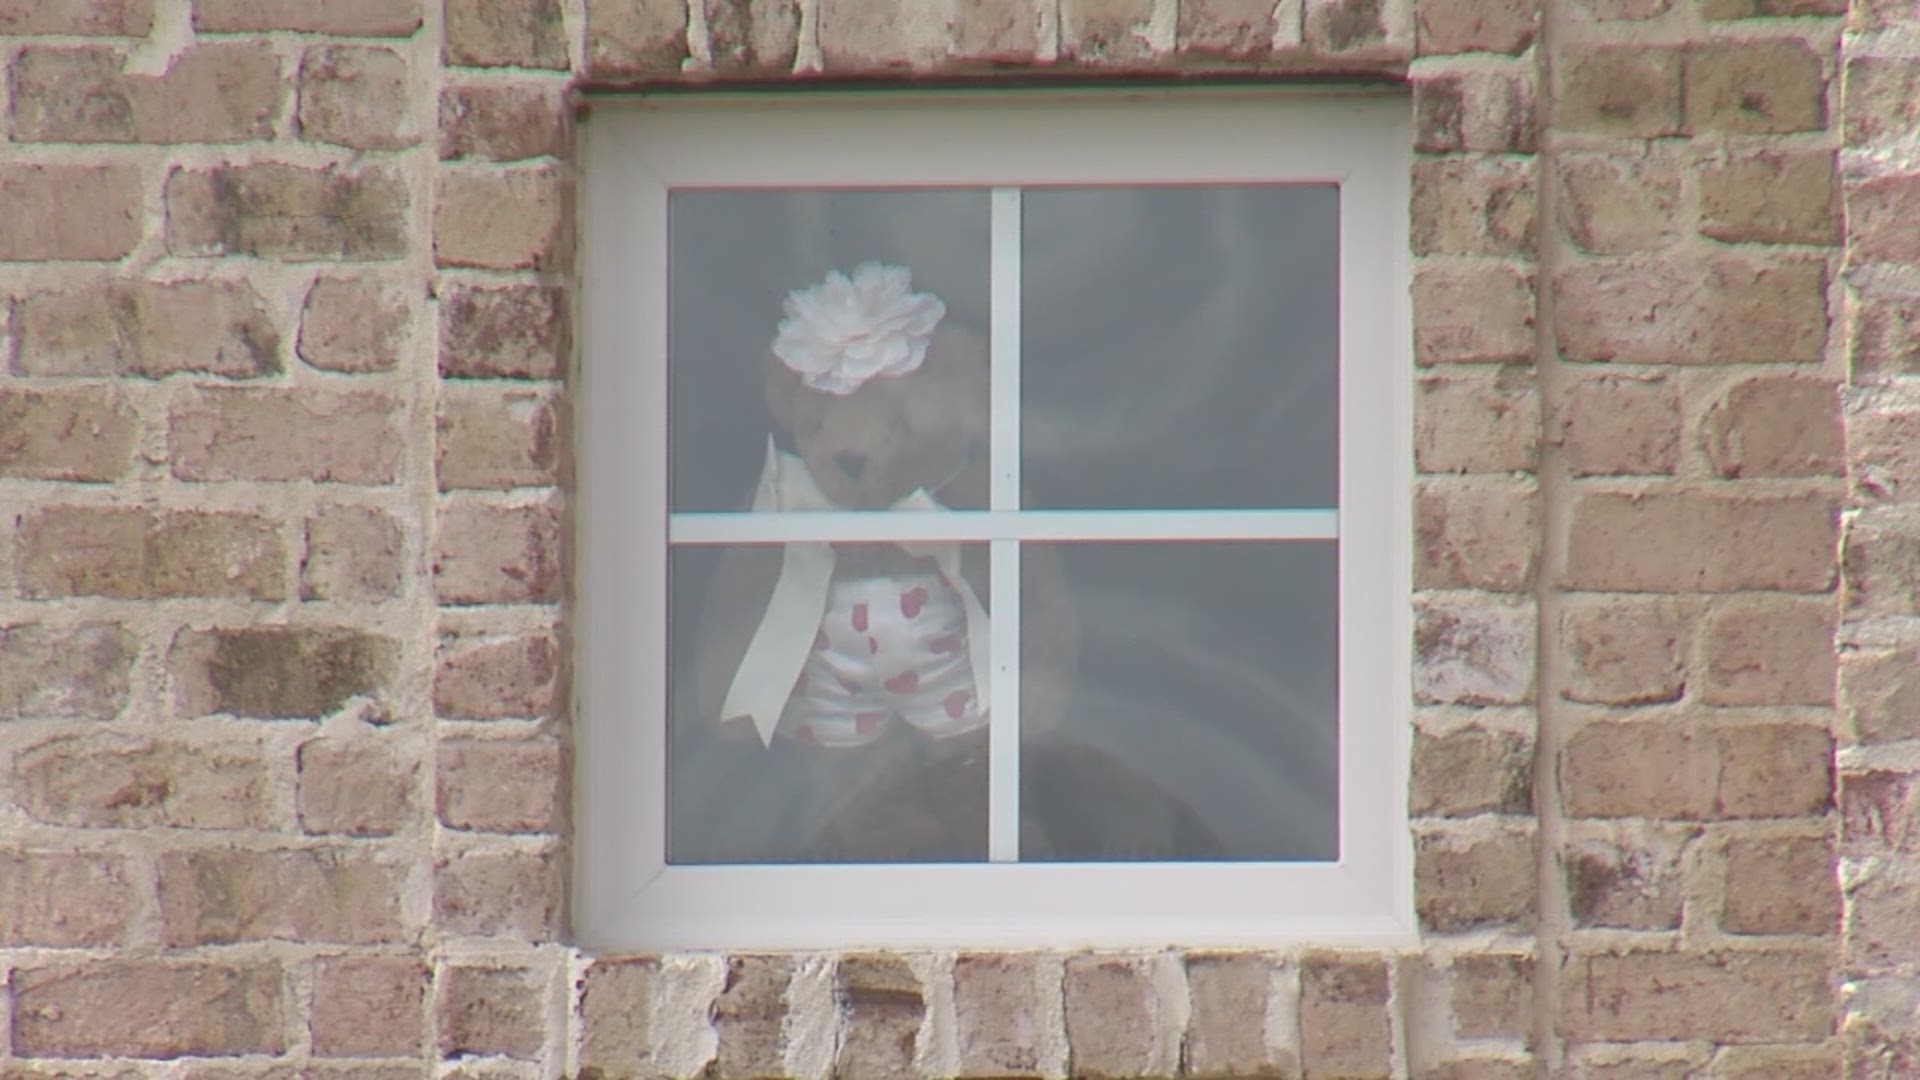 People in one North Mississippi neighborhood are putting teddy bears in windows of their homes to encourage families to go on teddy bear hunts